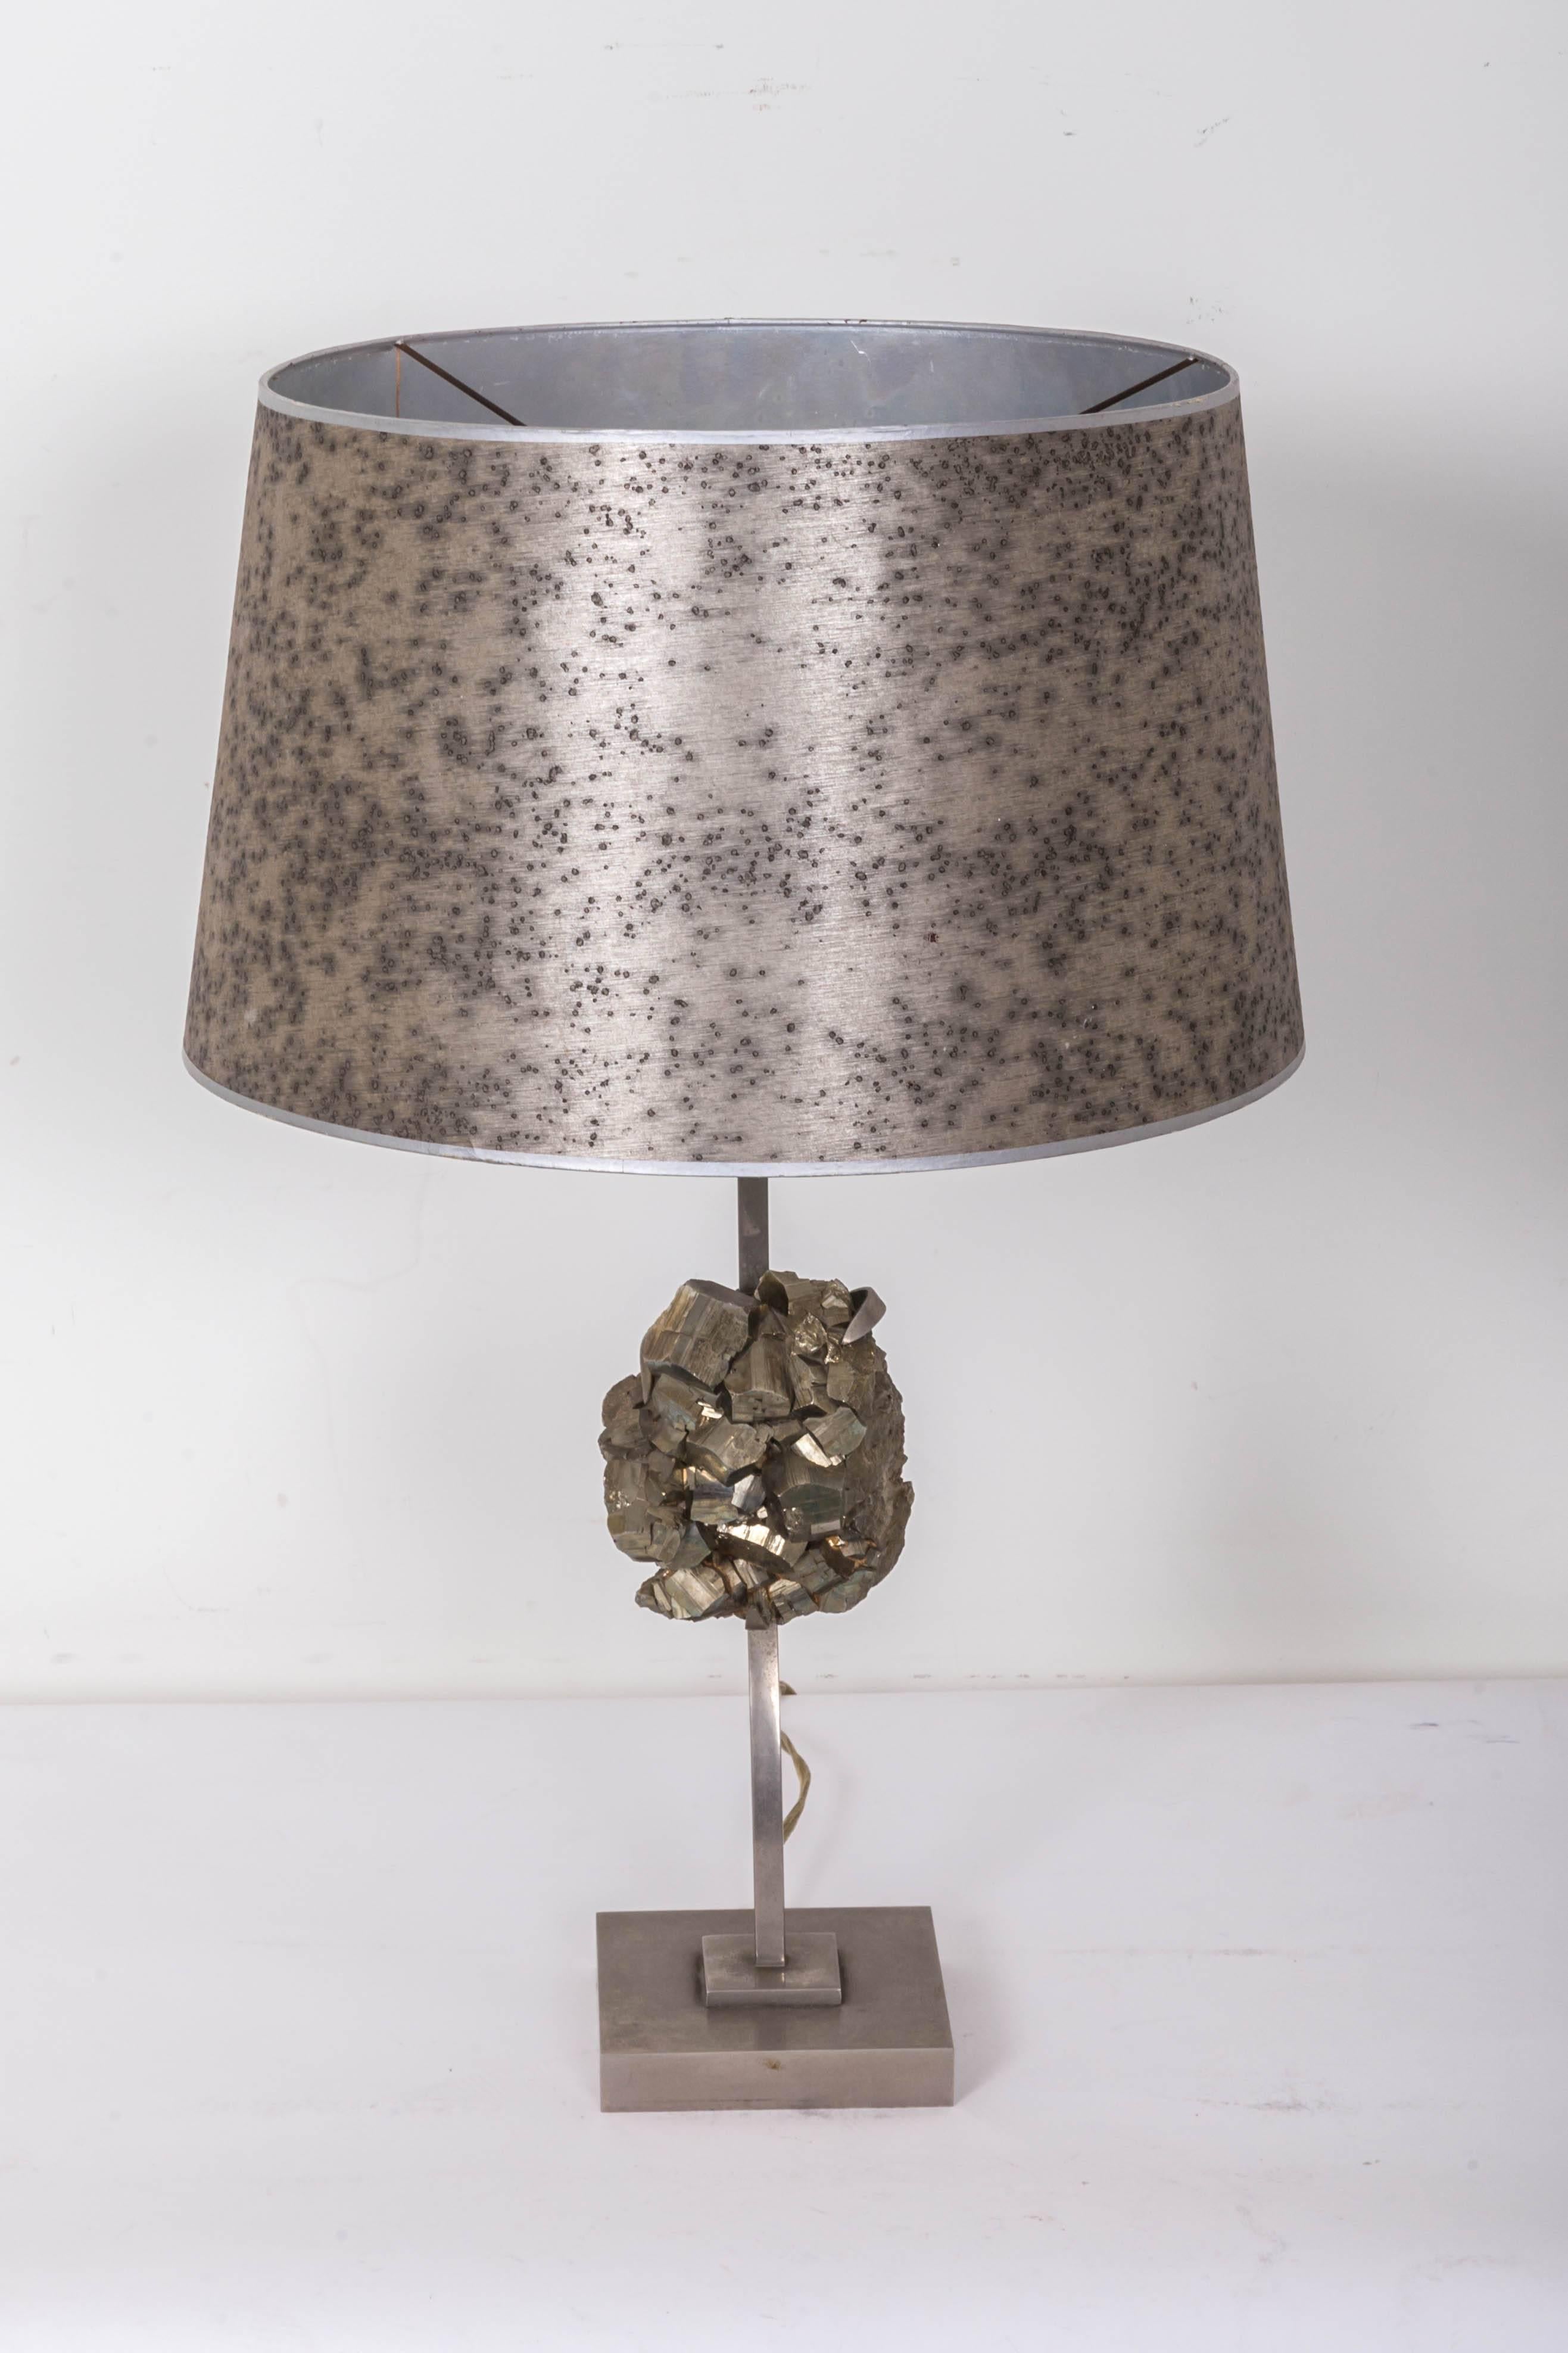 Beautiful agate table lamp designed by Willy Daro. Original silver shade featuring a pyrite stone on a mat nickel over brass stand.